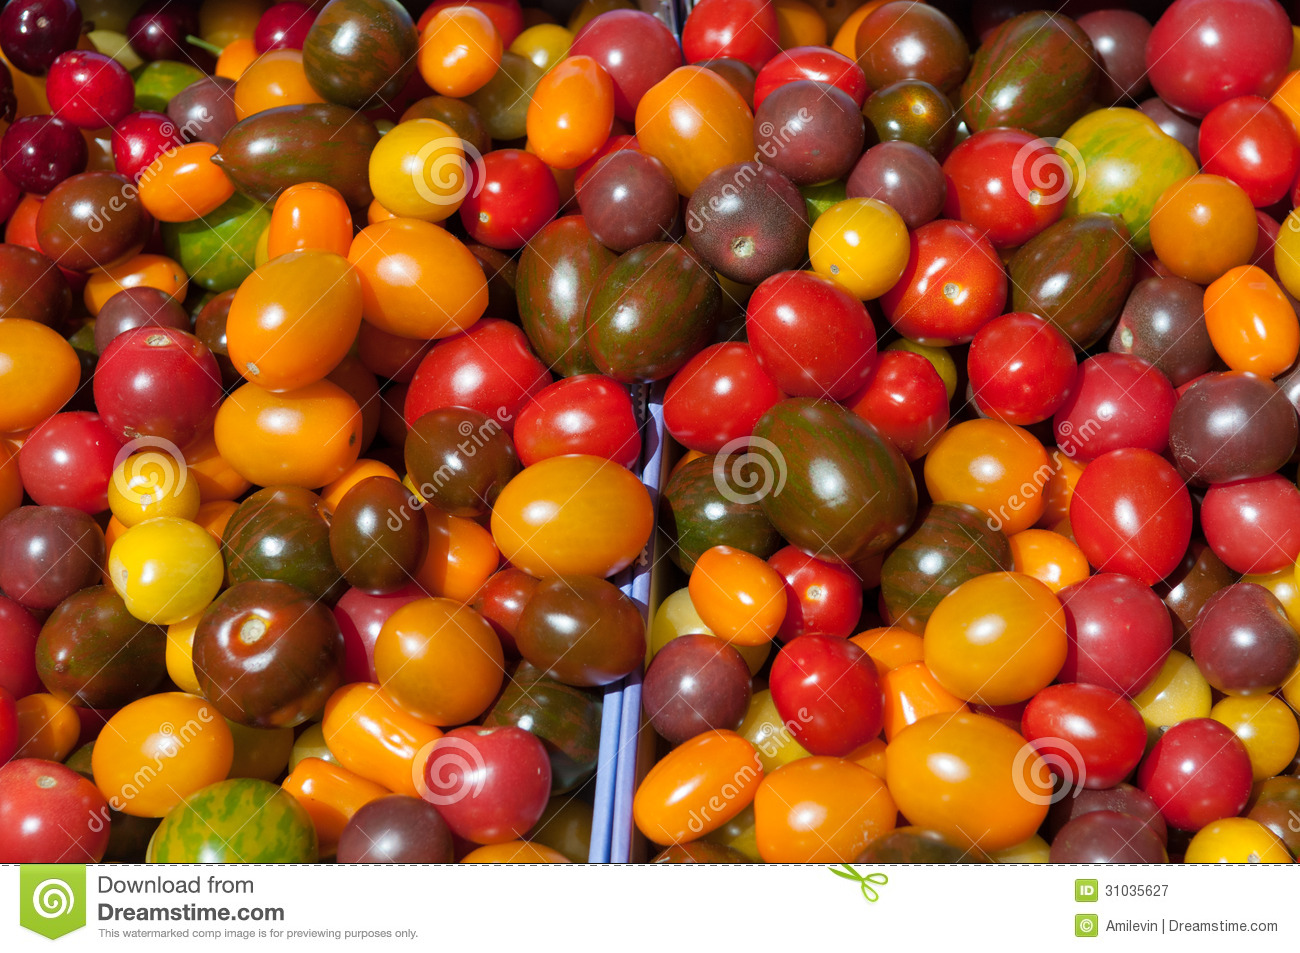 Cherry Tomatoes Royalty Free Stock Photography   Image  31035627